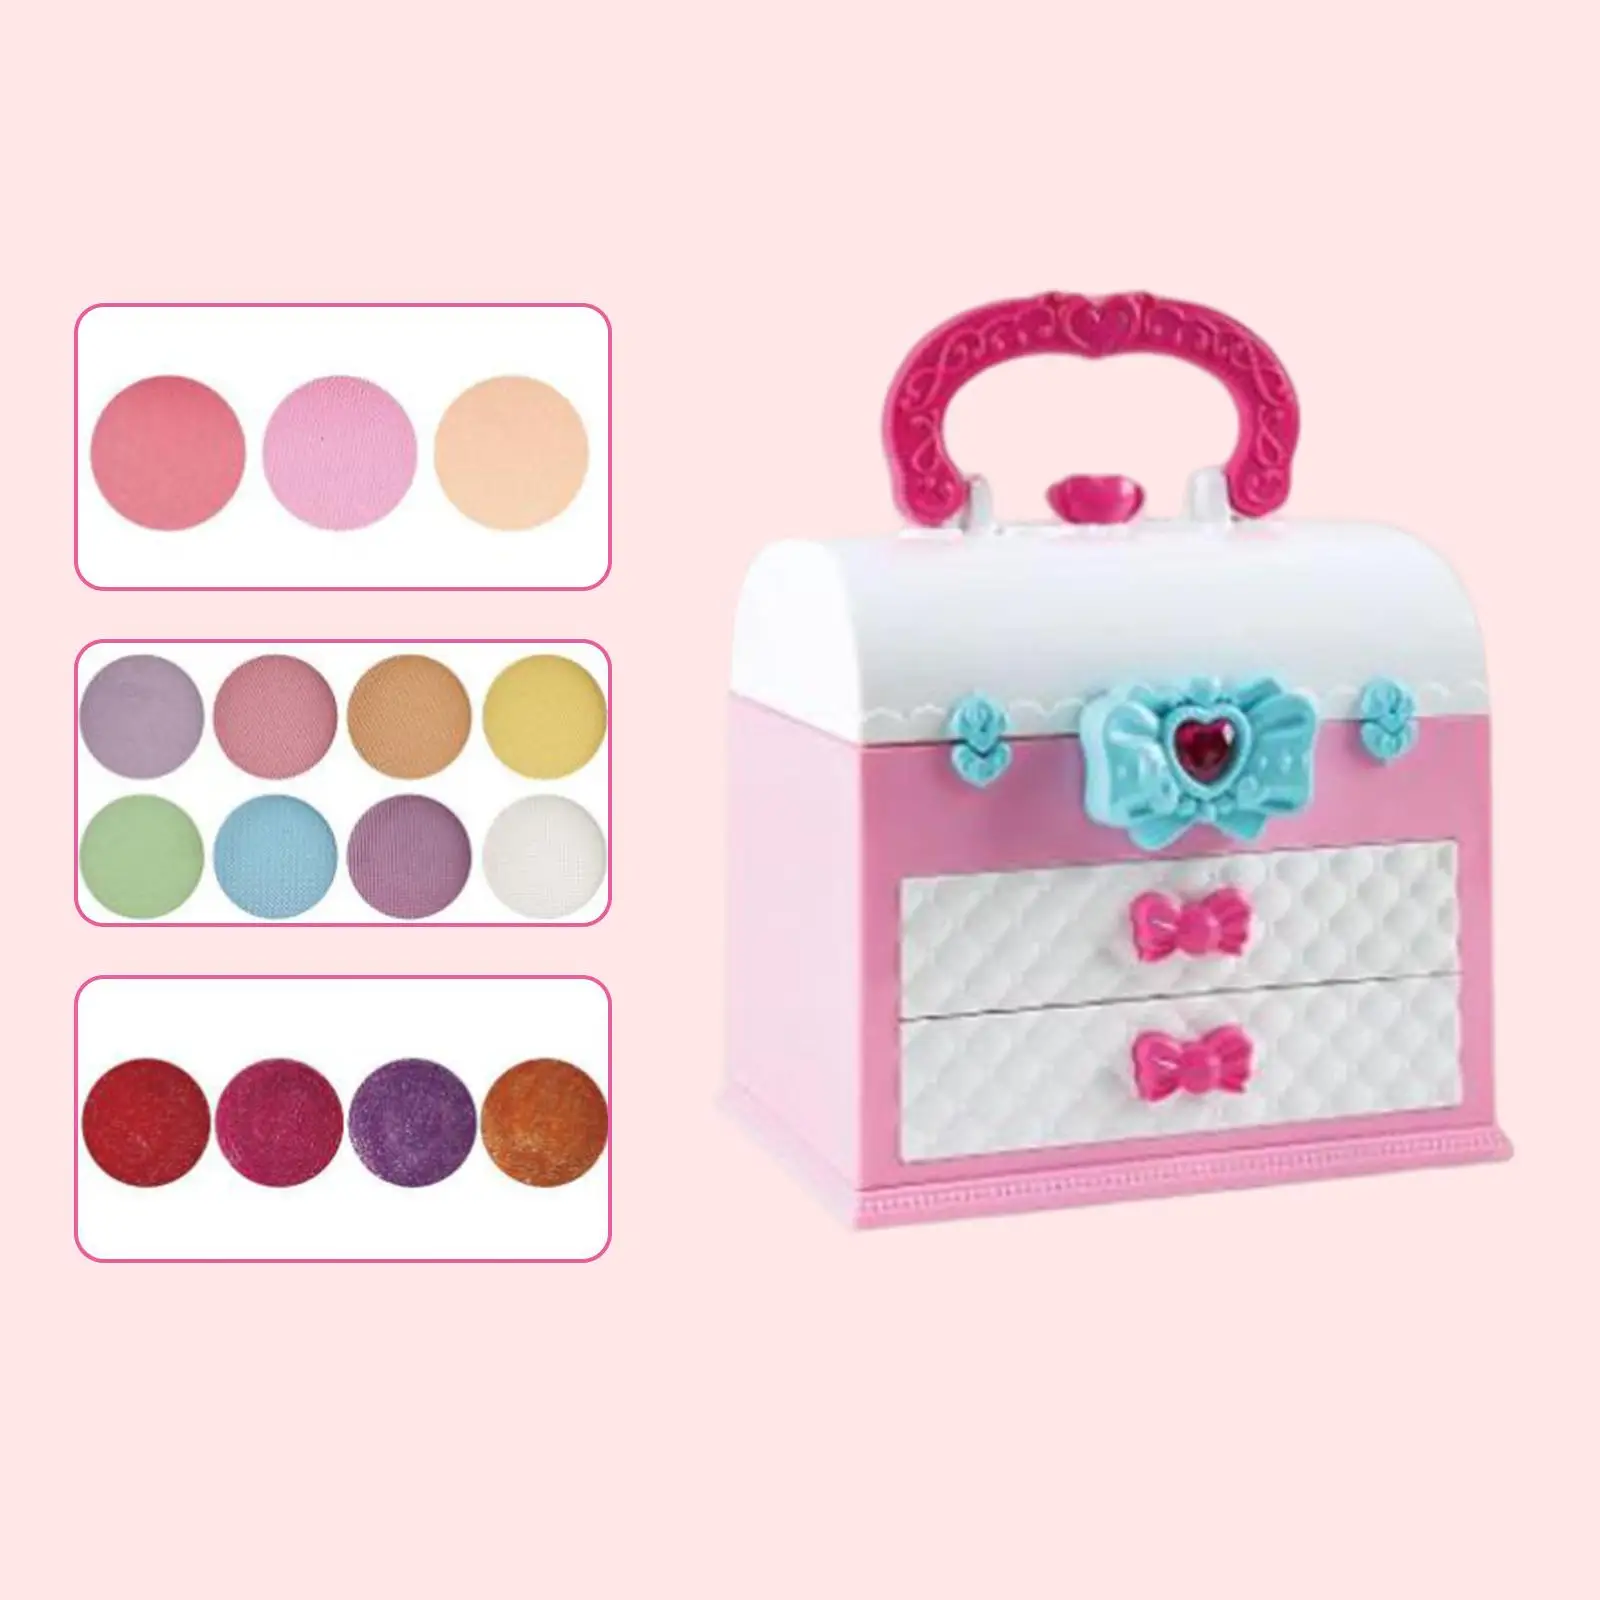 Kids Makeup for Girl Pretend Game Play House Toys Set Dress up Little Girl Makeup Set for Children Girls Party Favors Gifts